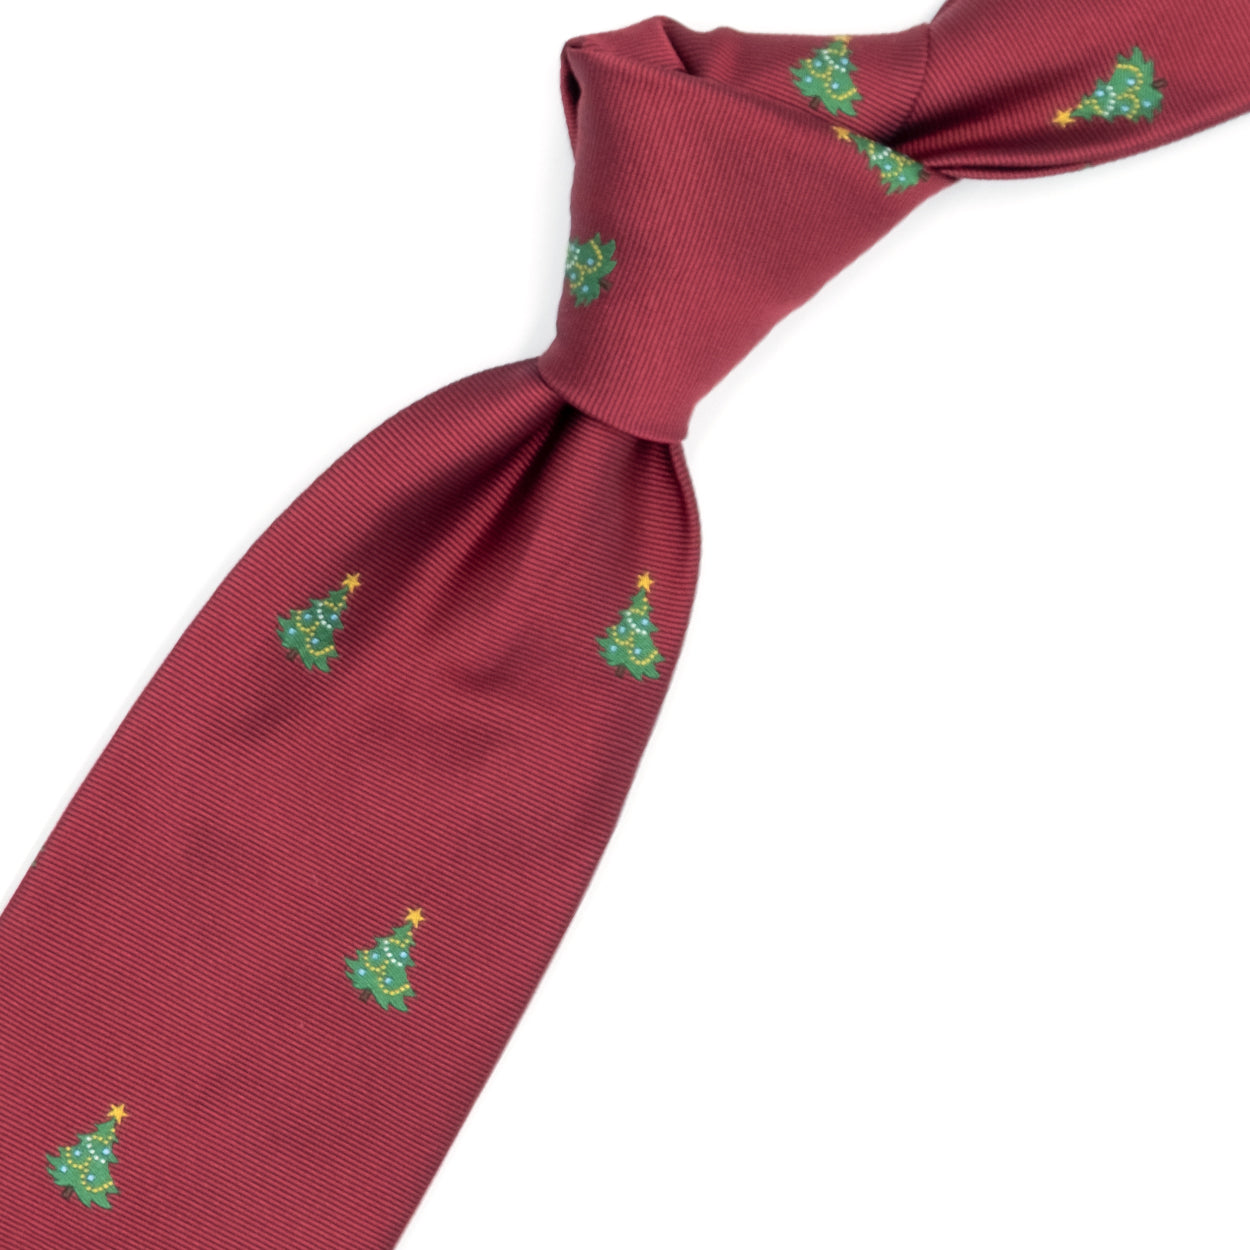 Red tie with Christmas trees